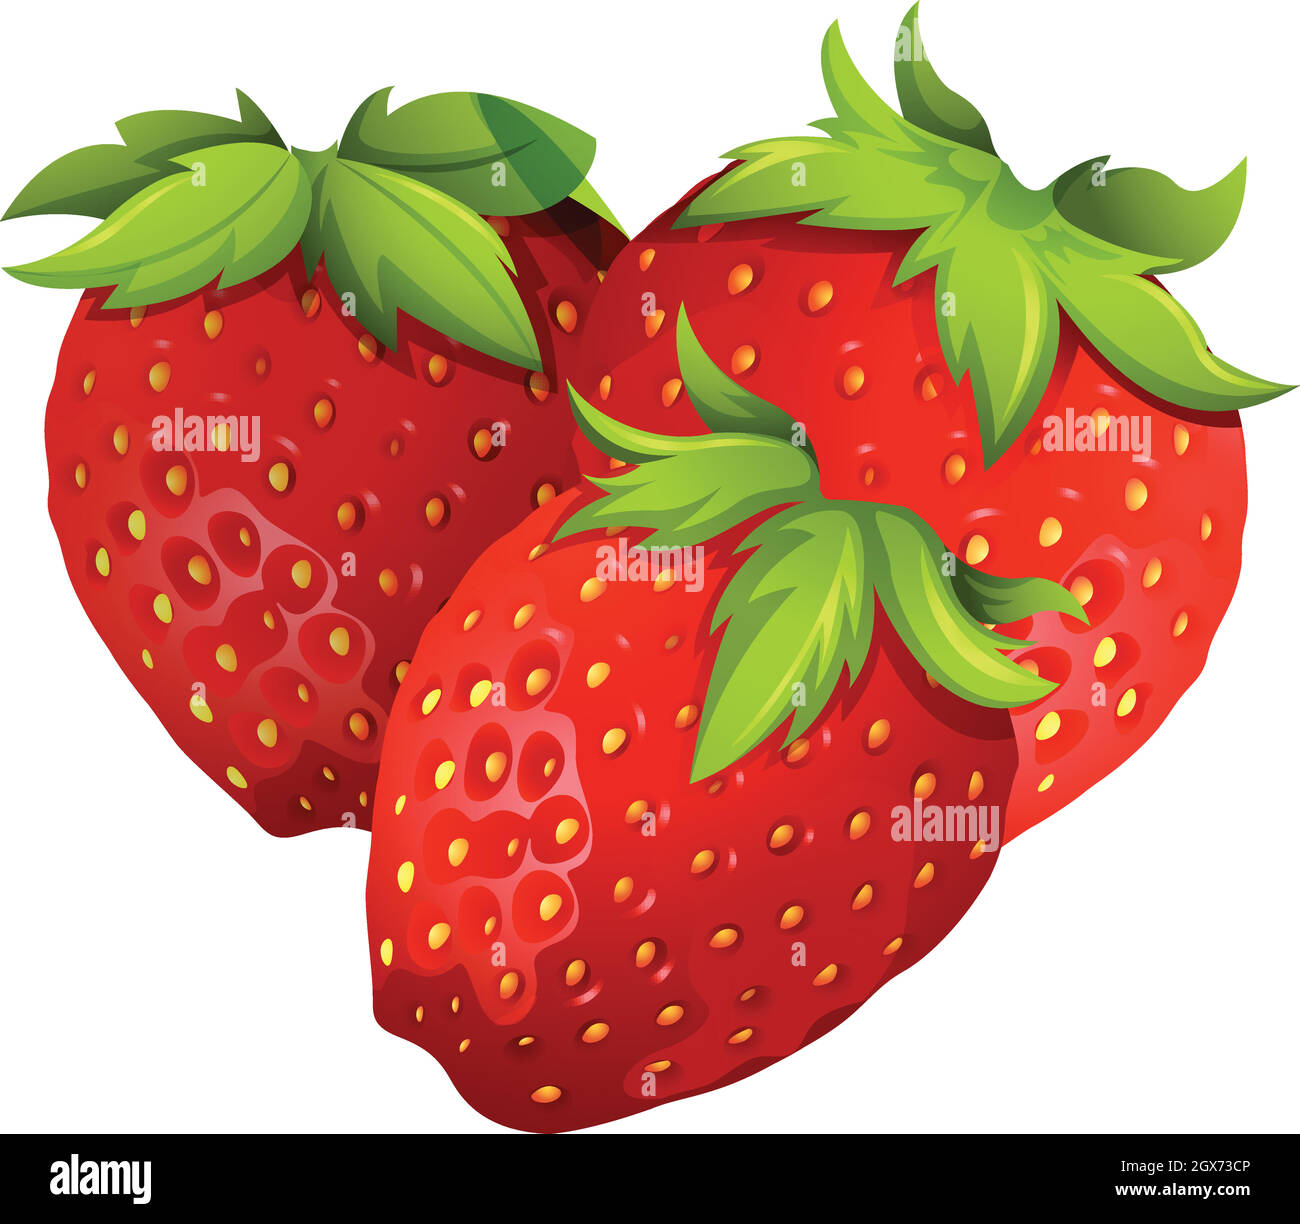 Strawberries Stock Vector Images - Alamy